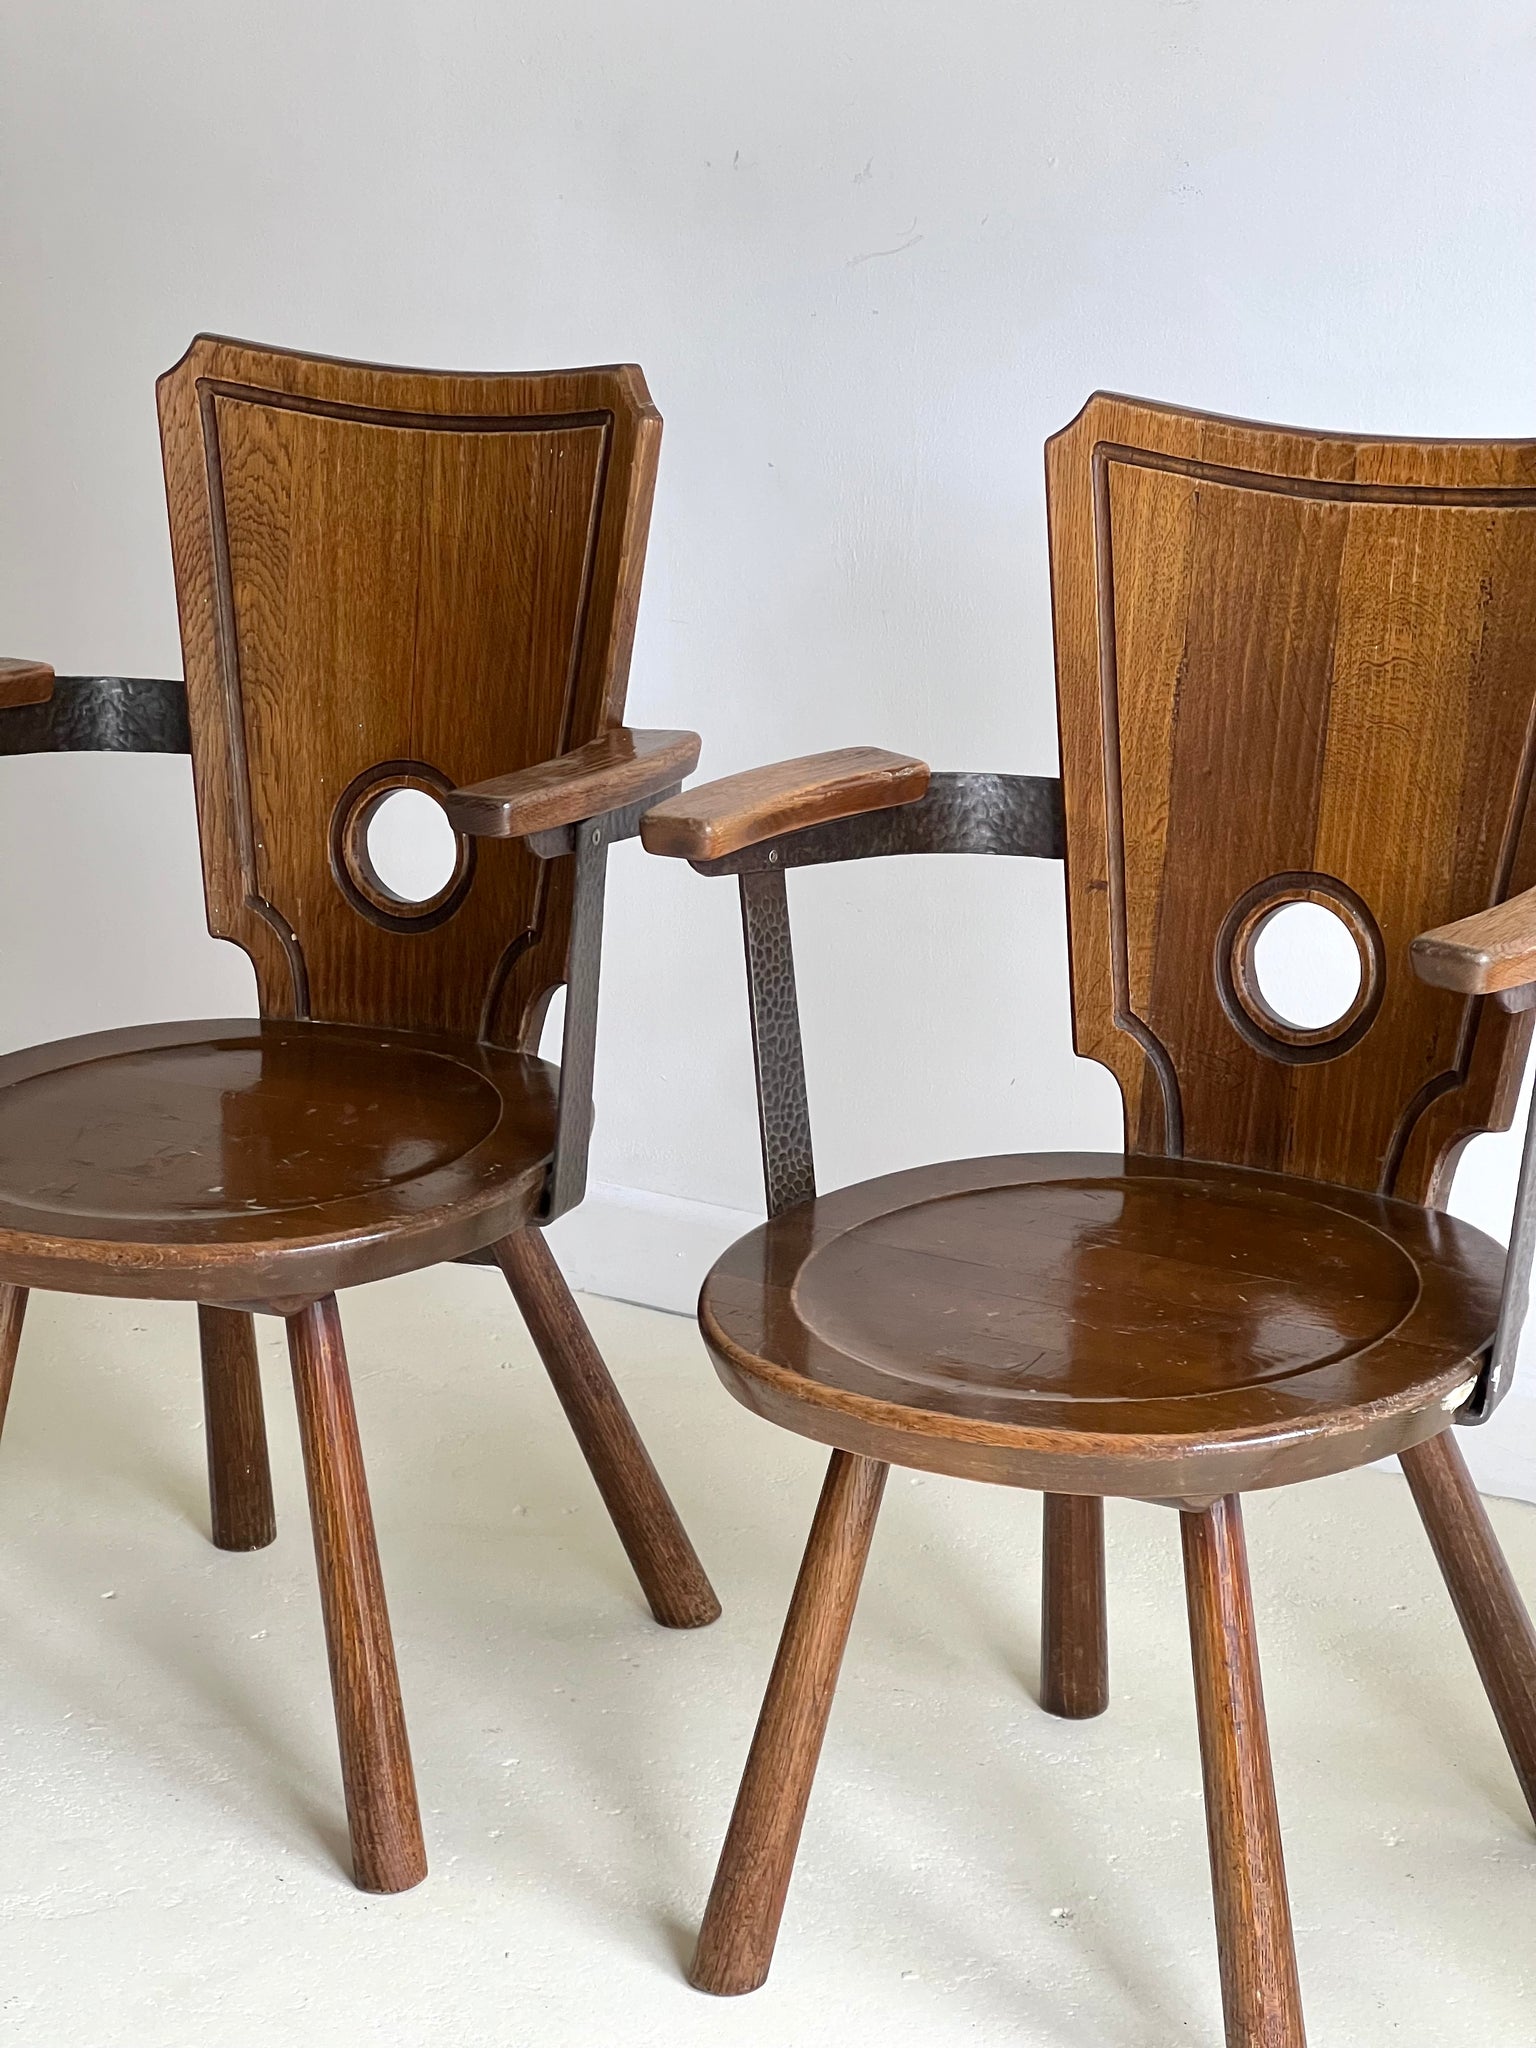 Set of x4 French Brutalist Armchairs